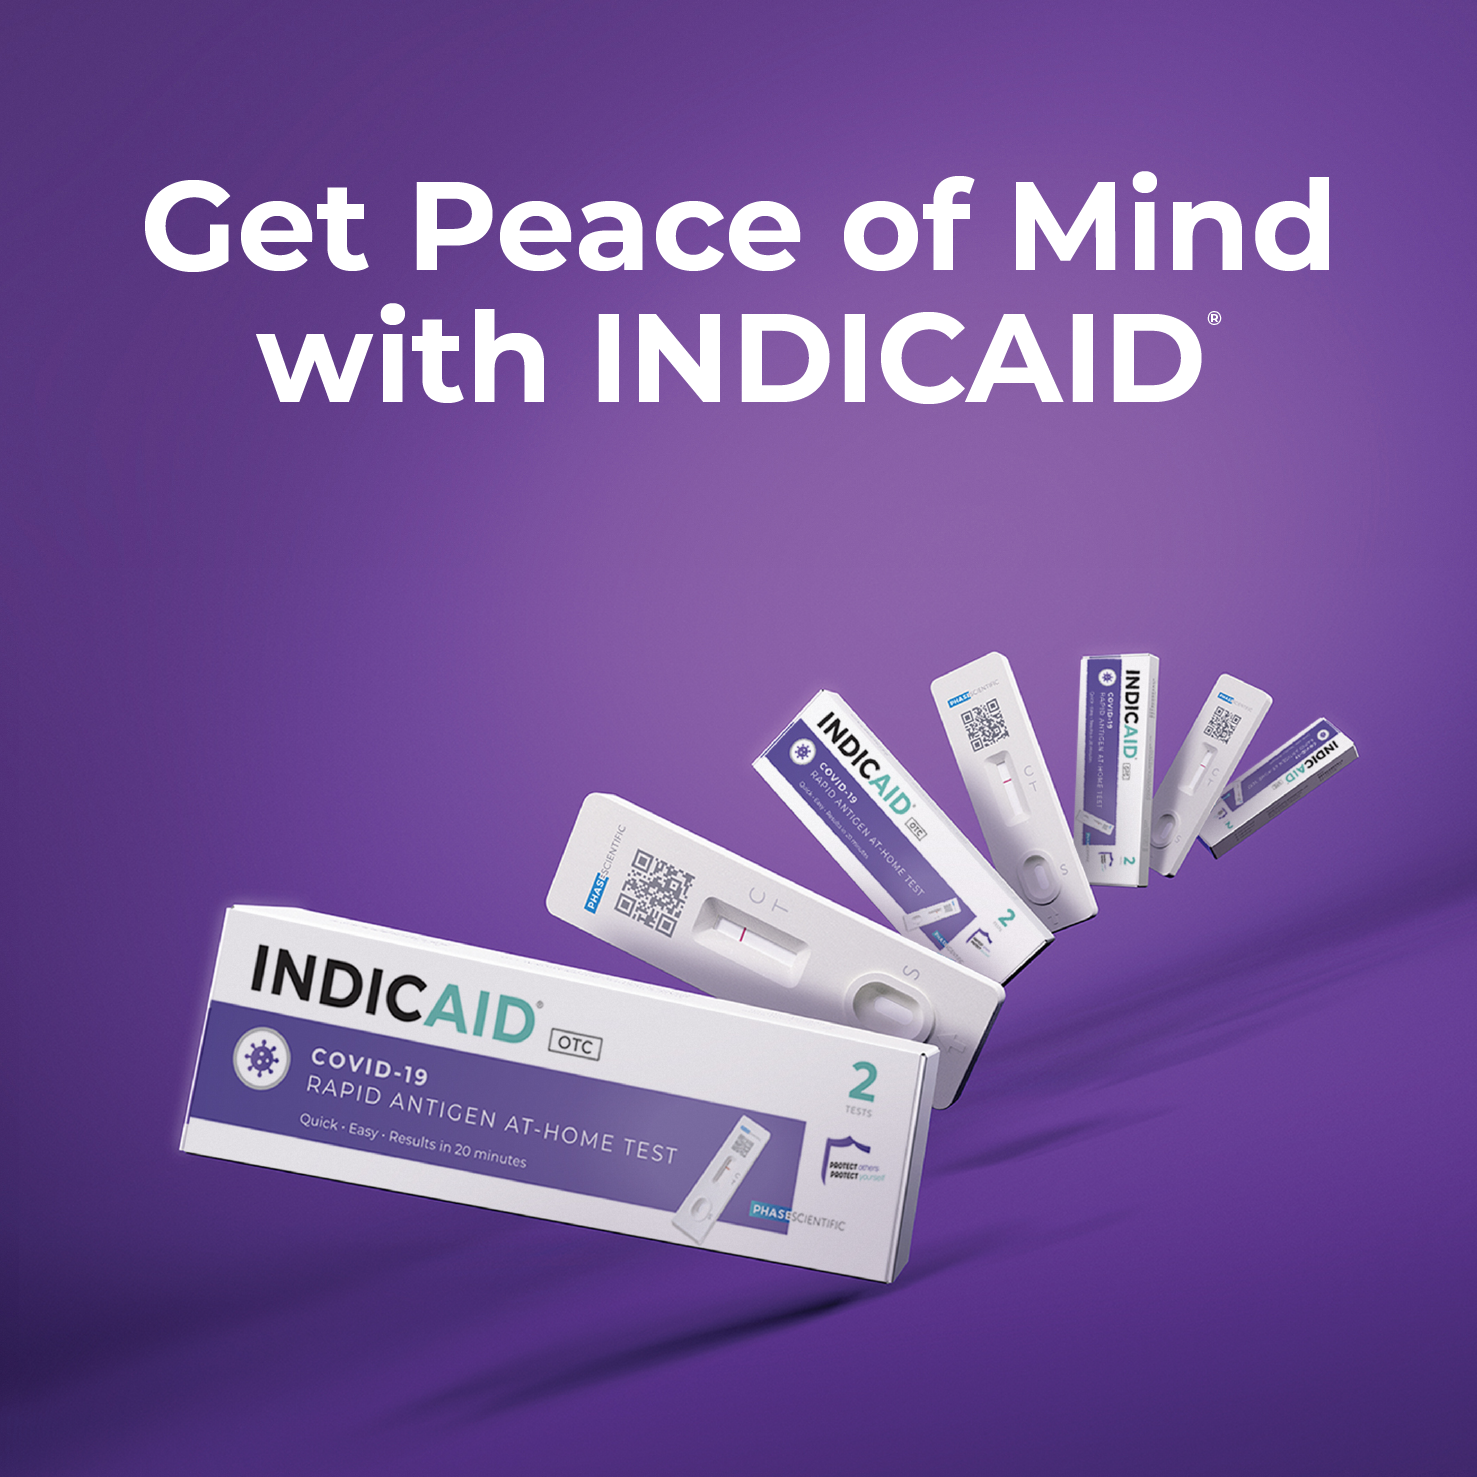 Get Peace of Mind with INDICAID